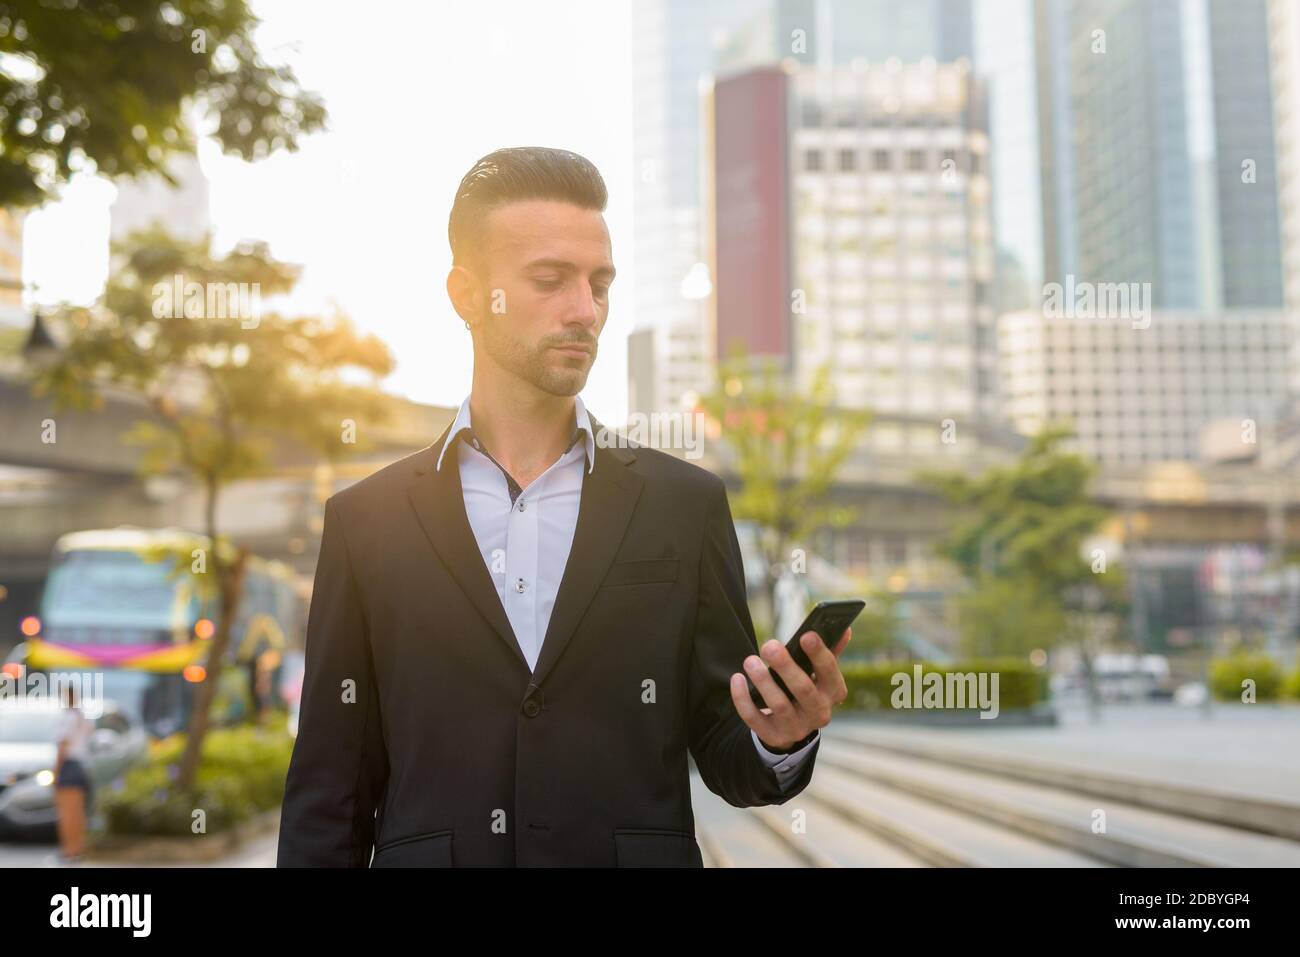 Portrait of handsome young businessman outdoors in city using phone Stock Photo